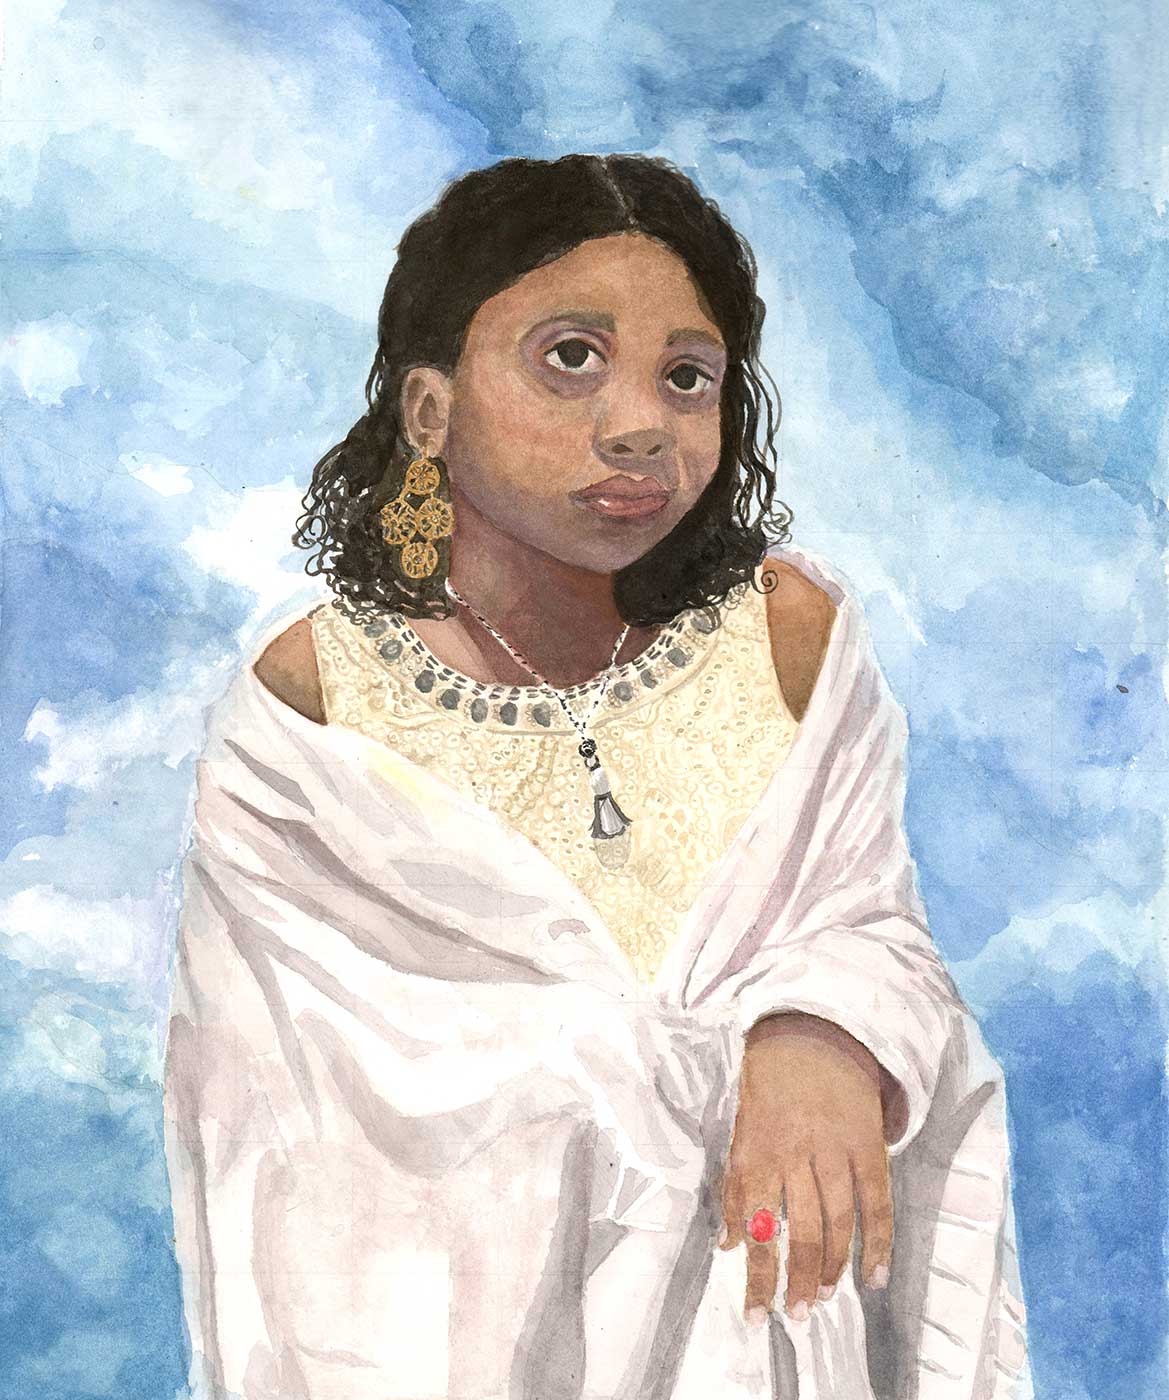 watercolor painting of young girl wearing a white shawl.